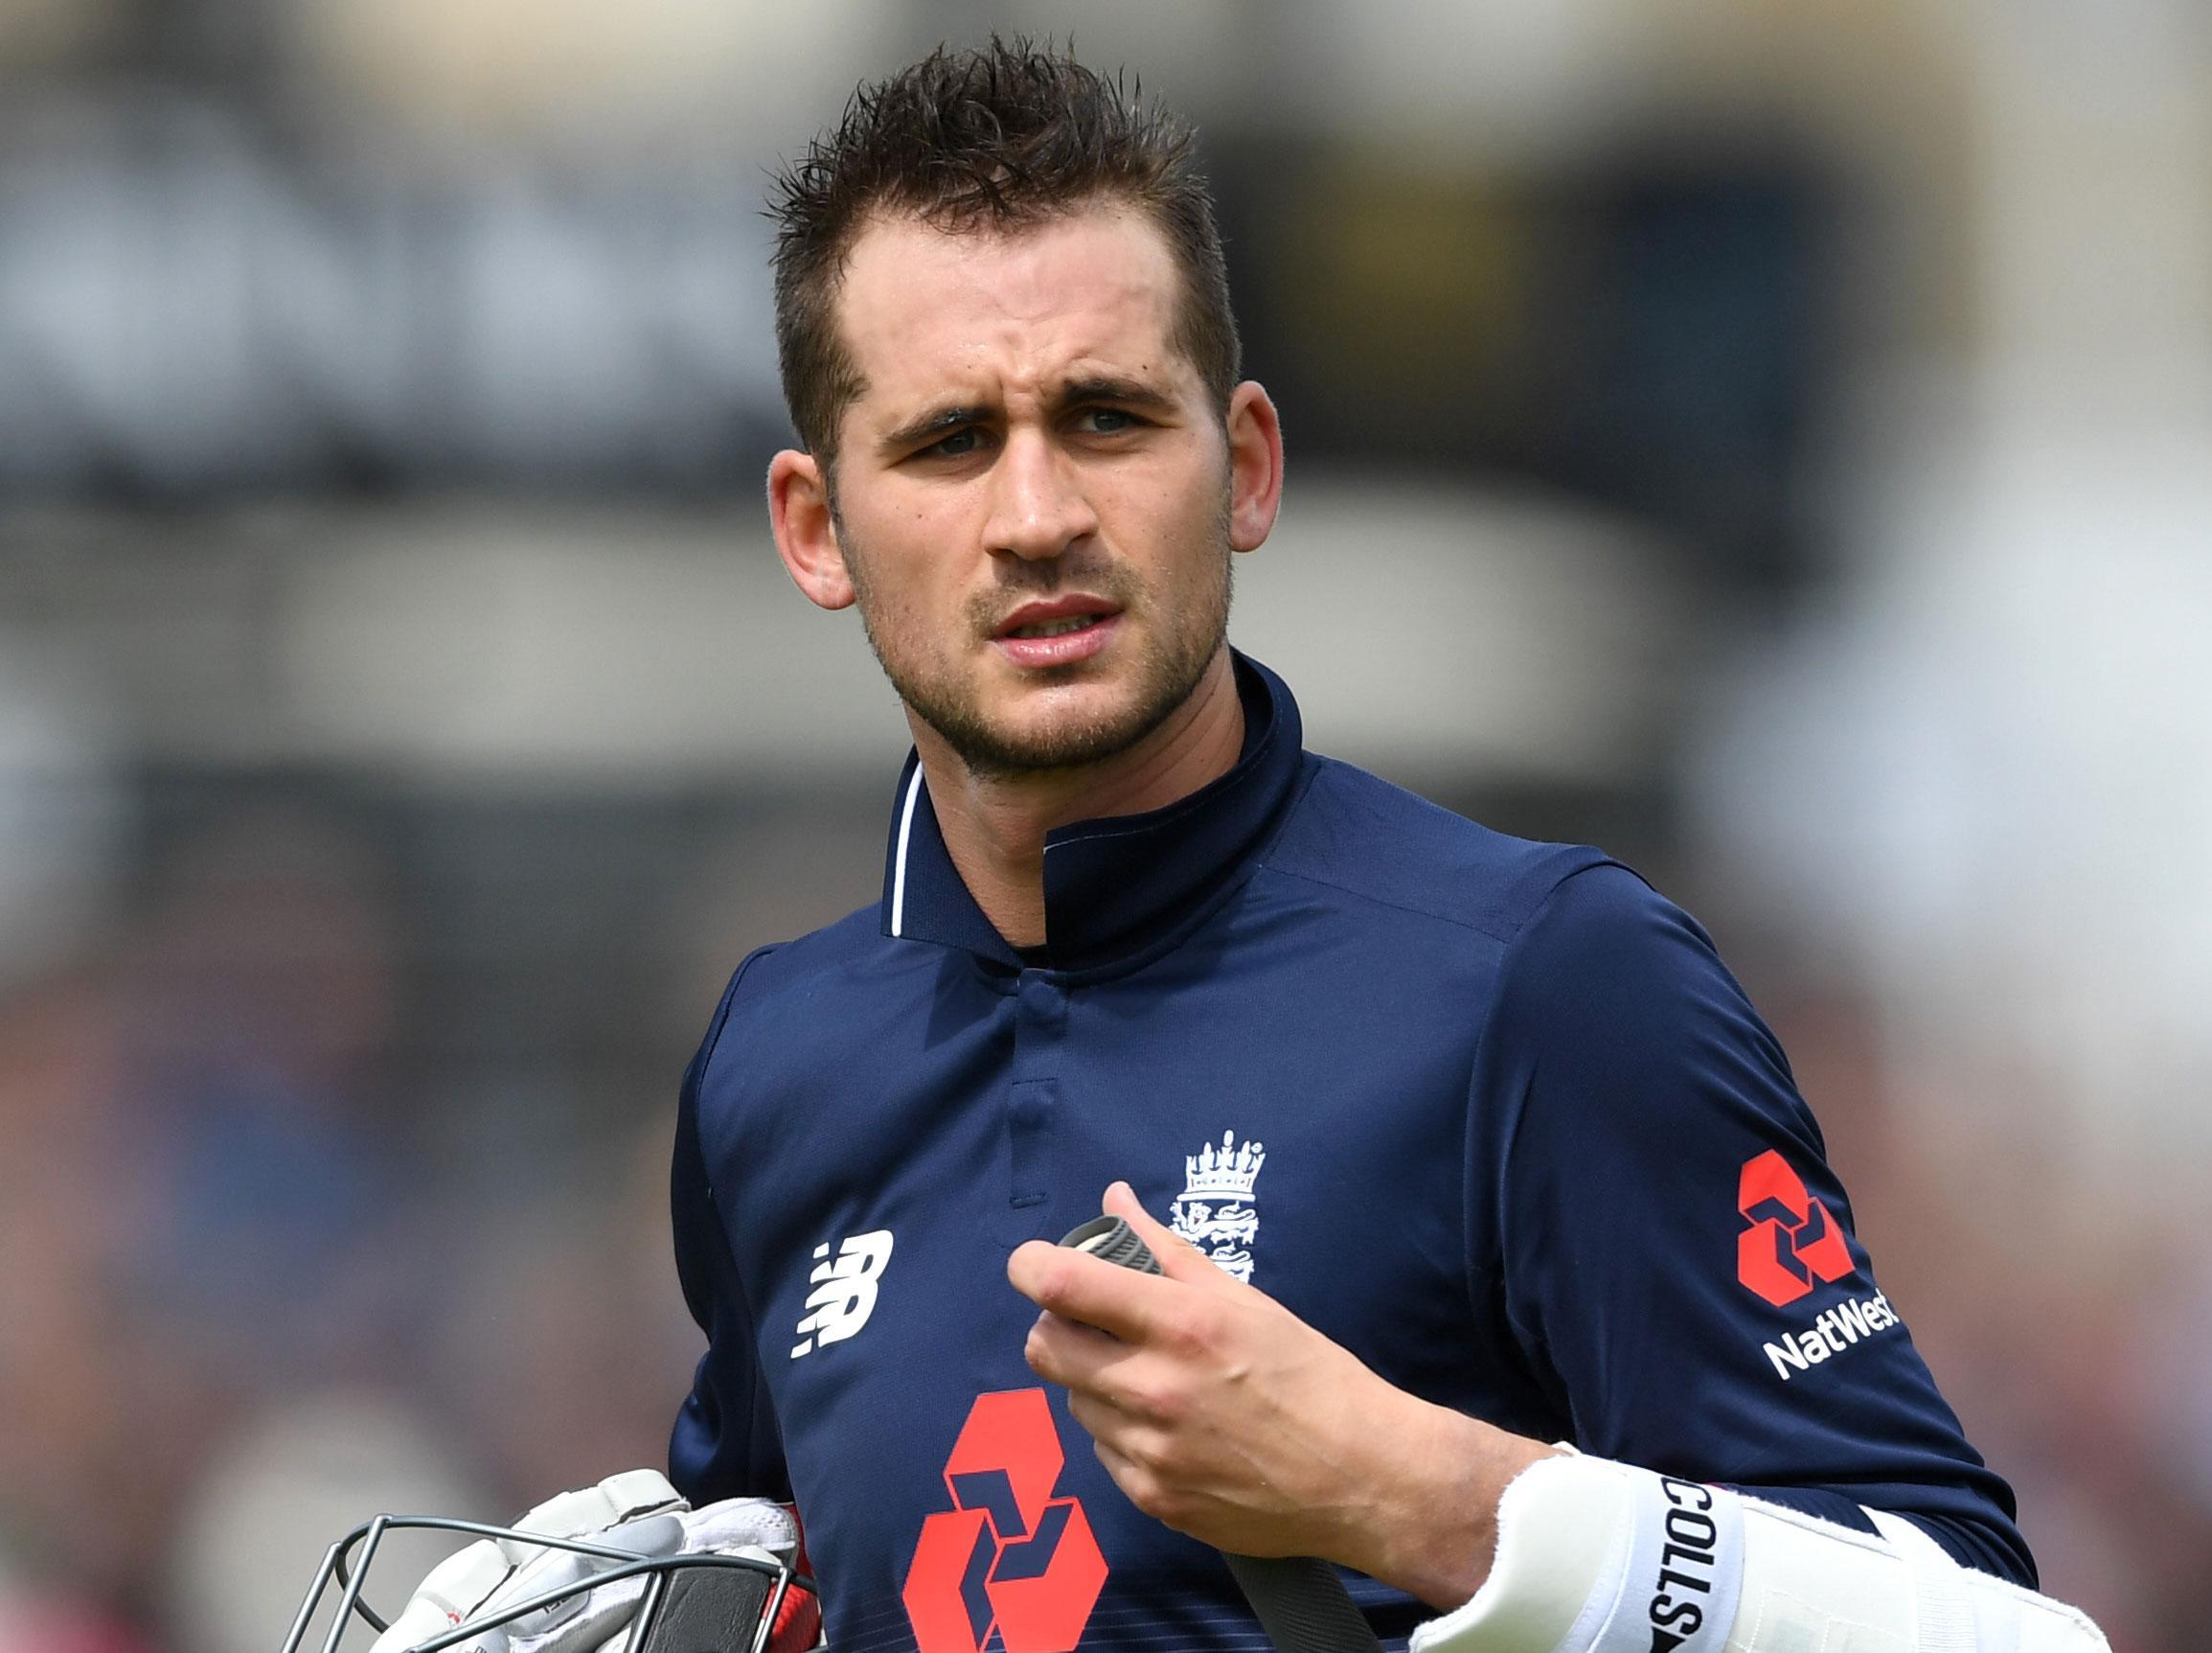 Alex Hales will now be considered by England once again